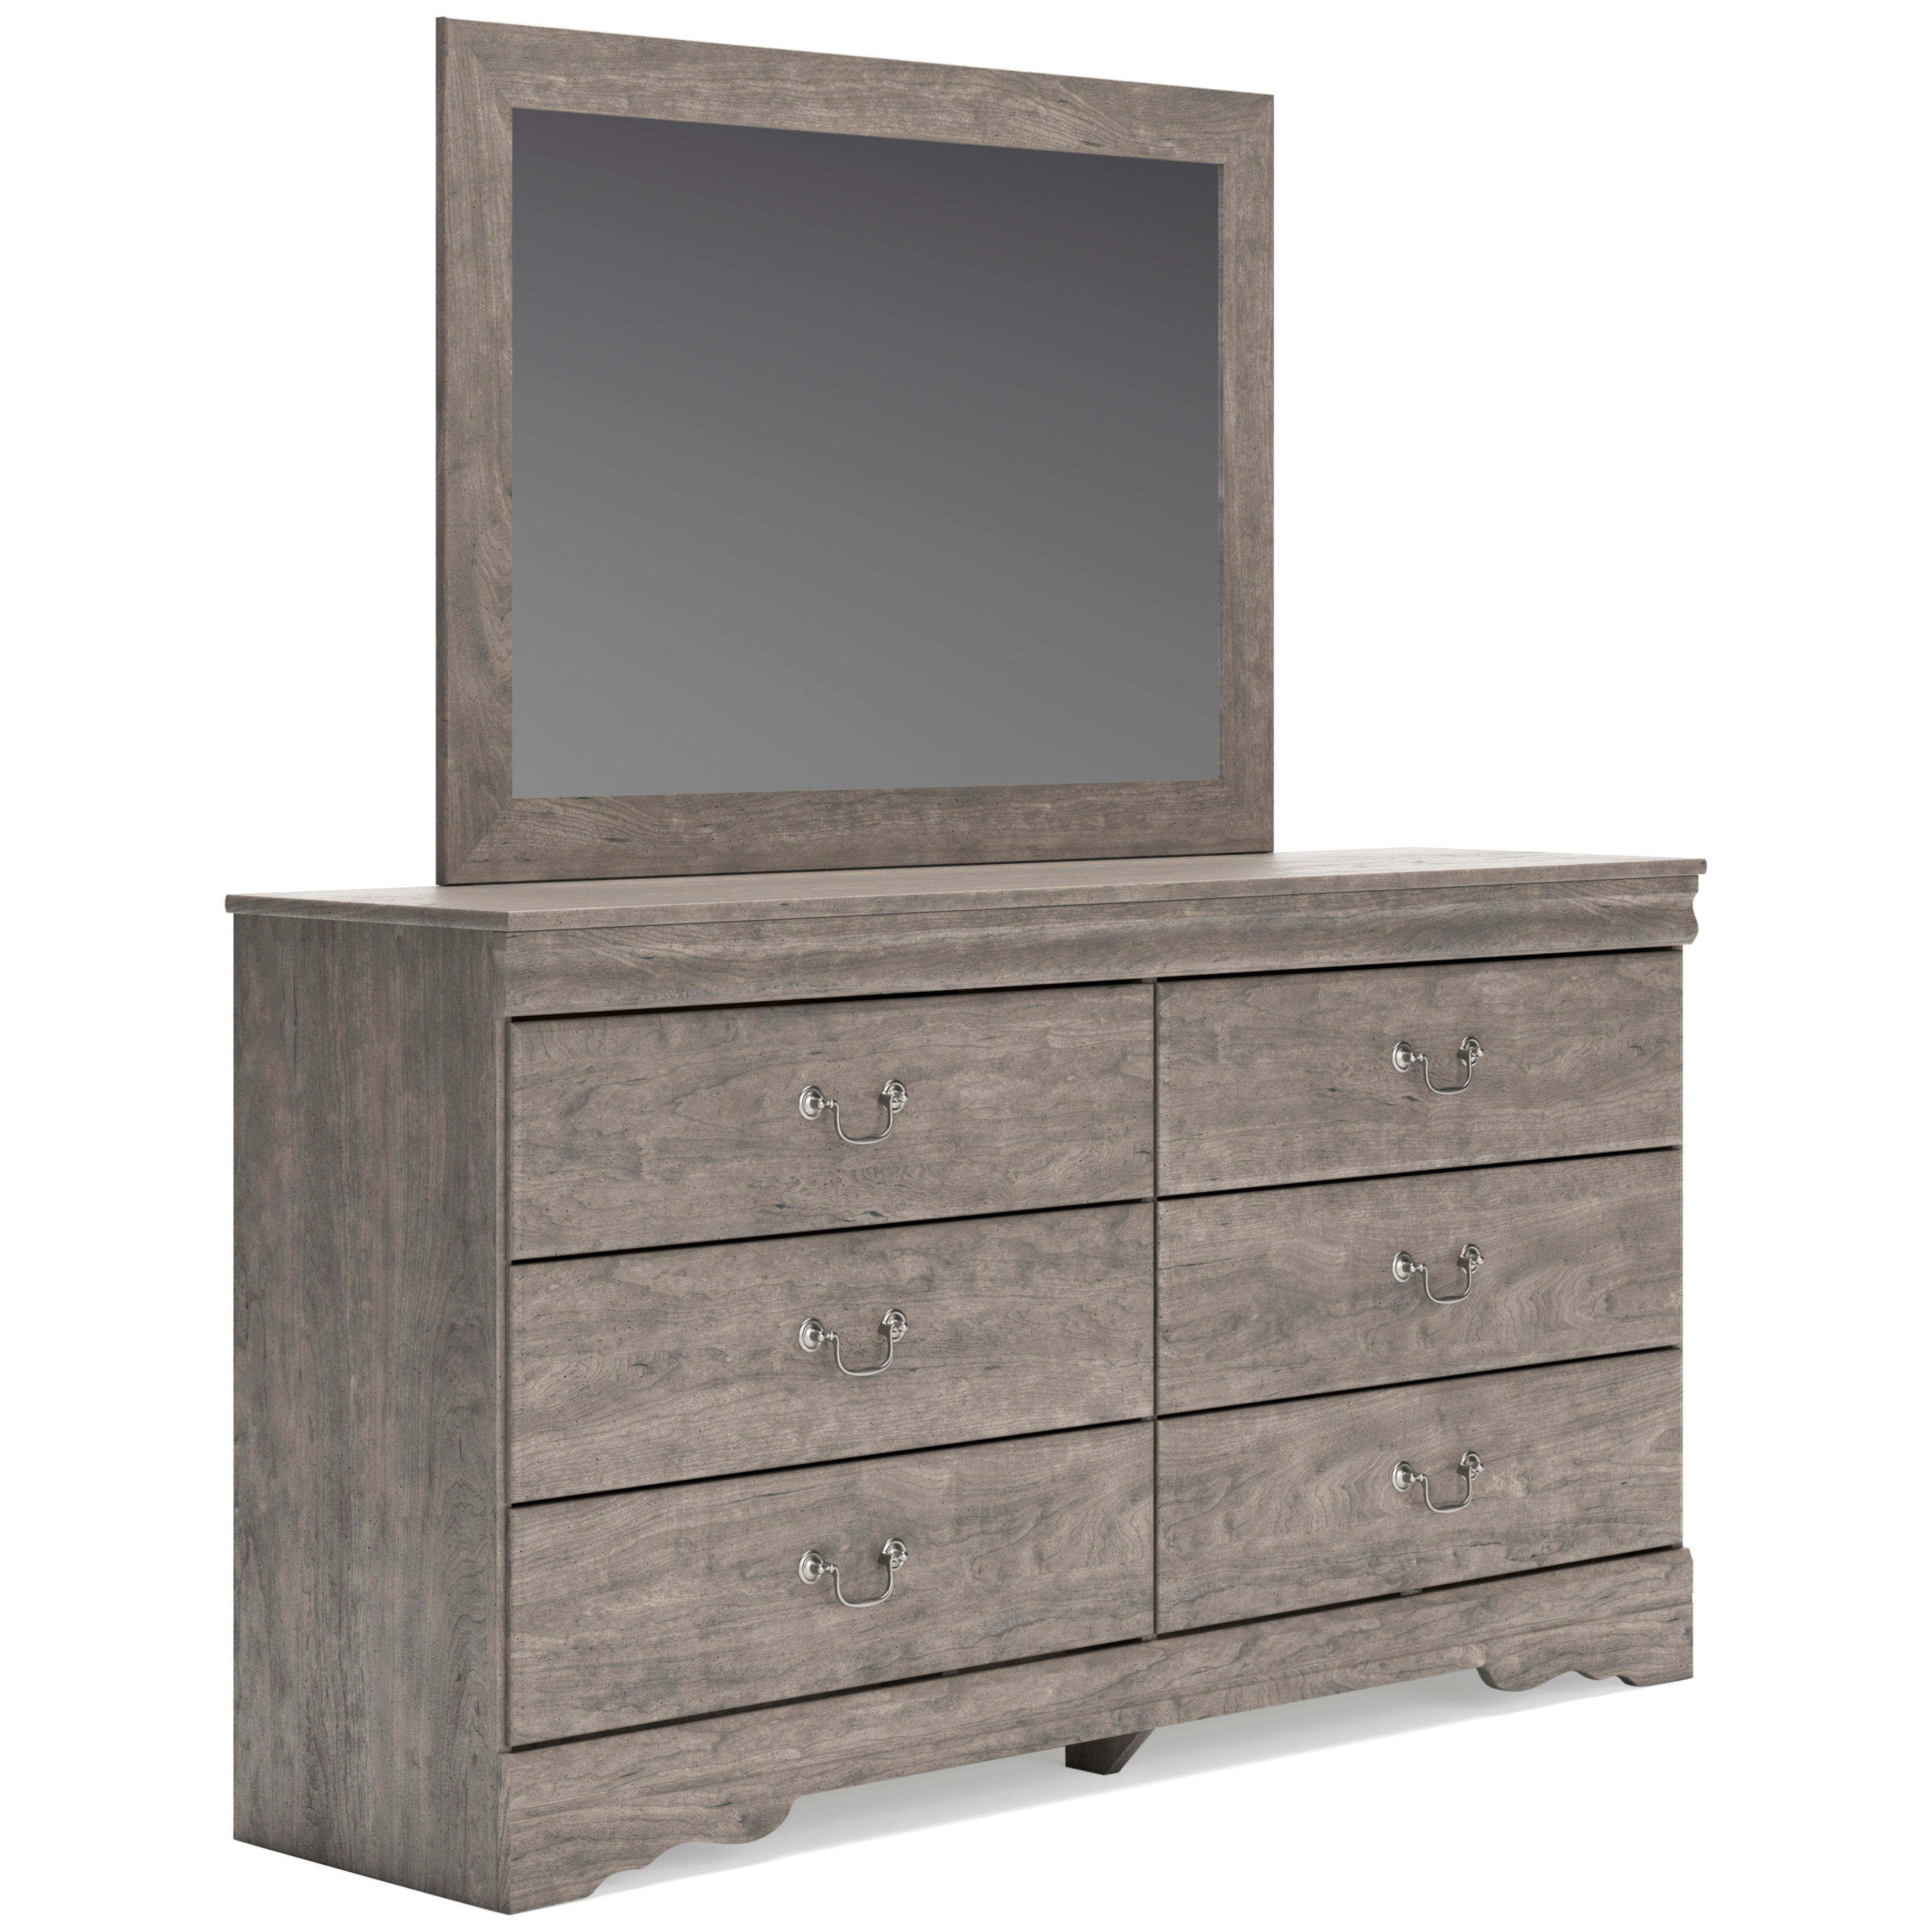 Picture of Bayzor Dresser and Mirror